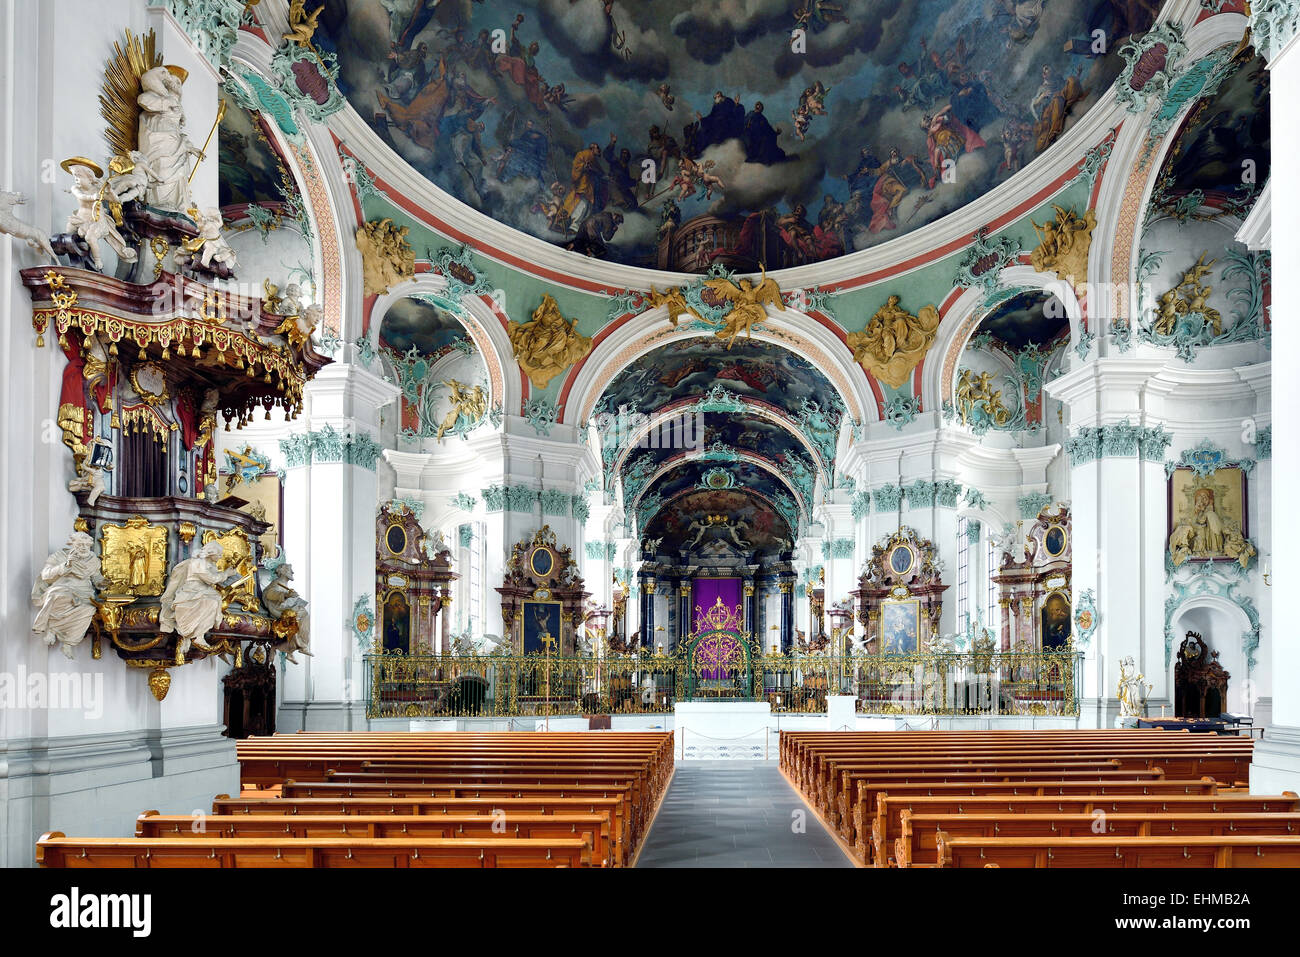 Rotunda with pulpit of the St. Gallen Cathedral, UNESCO World Heritage Site, St. Gallen, Switzerland Stock Photo